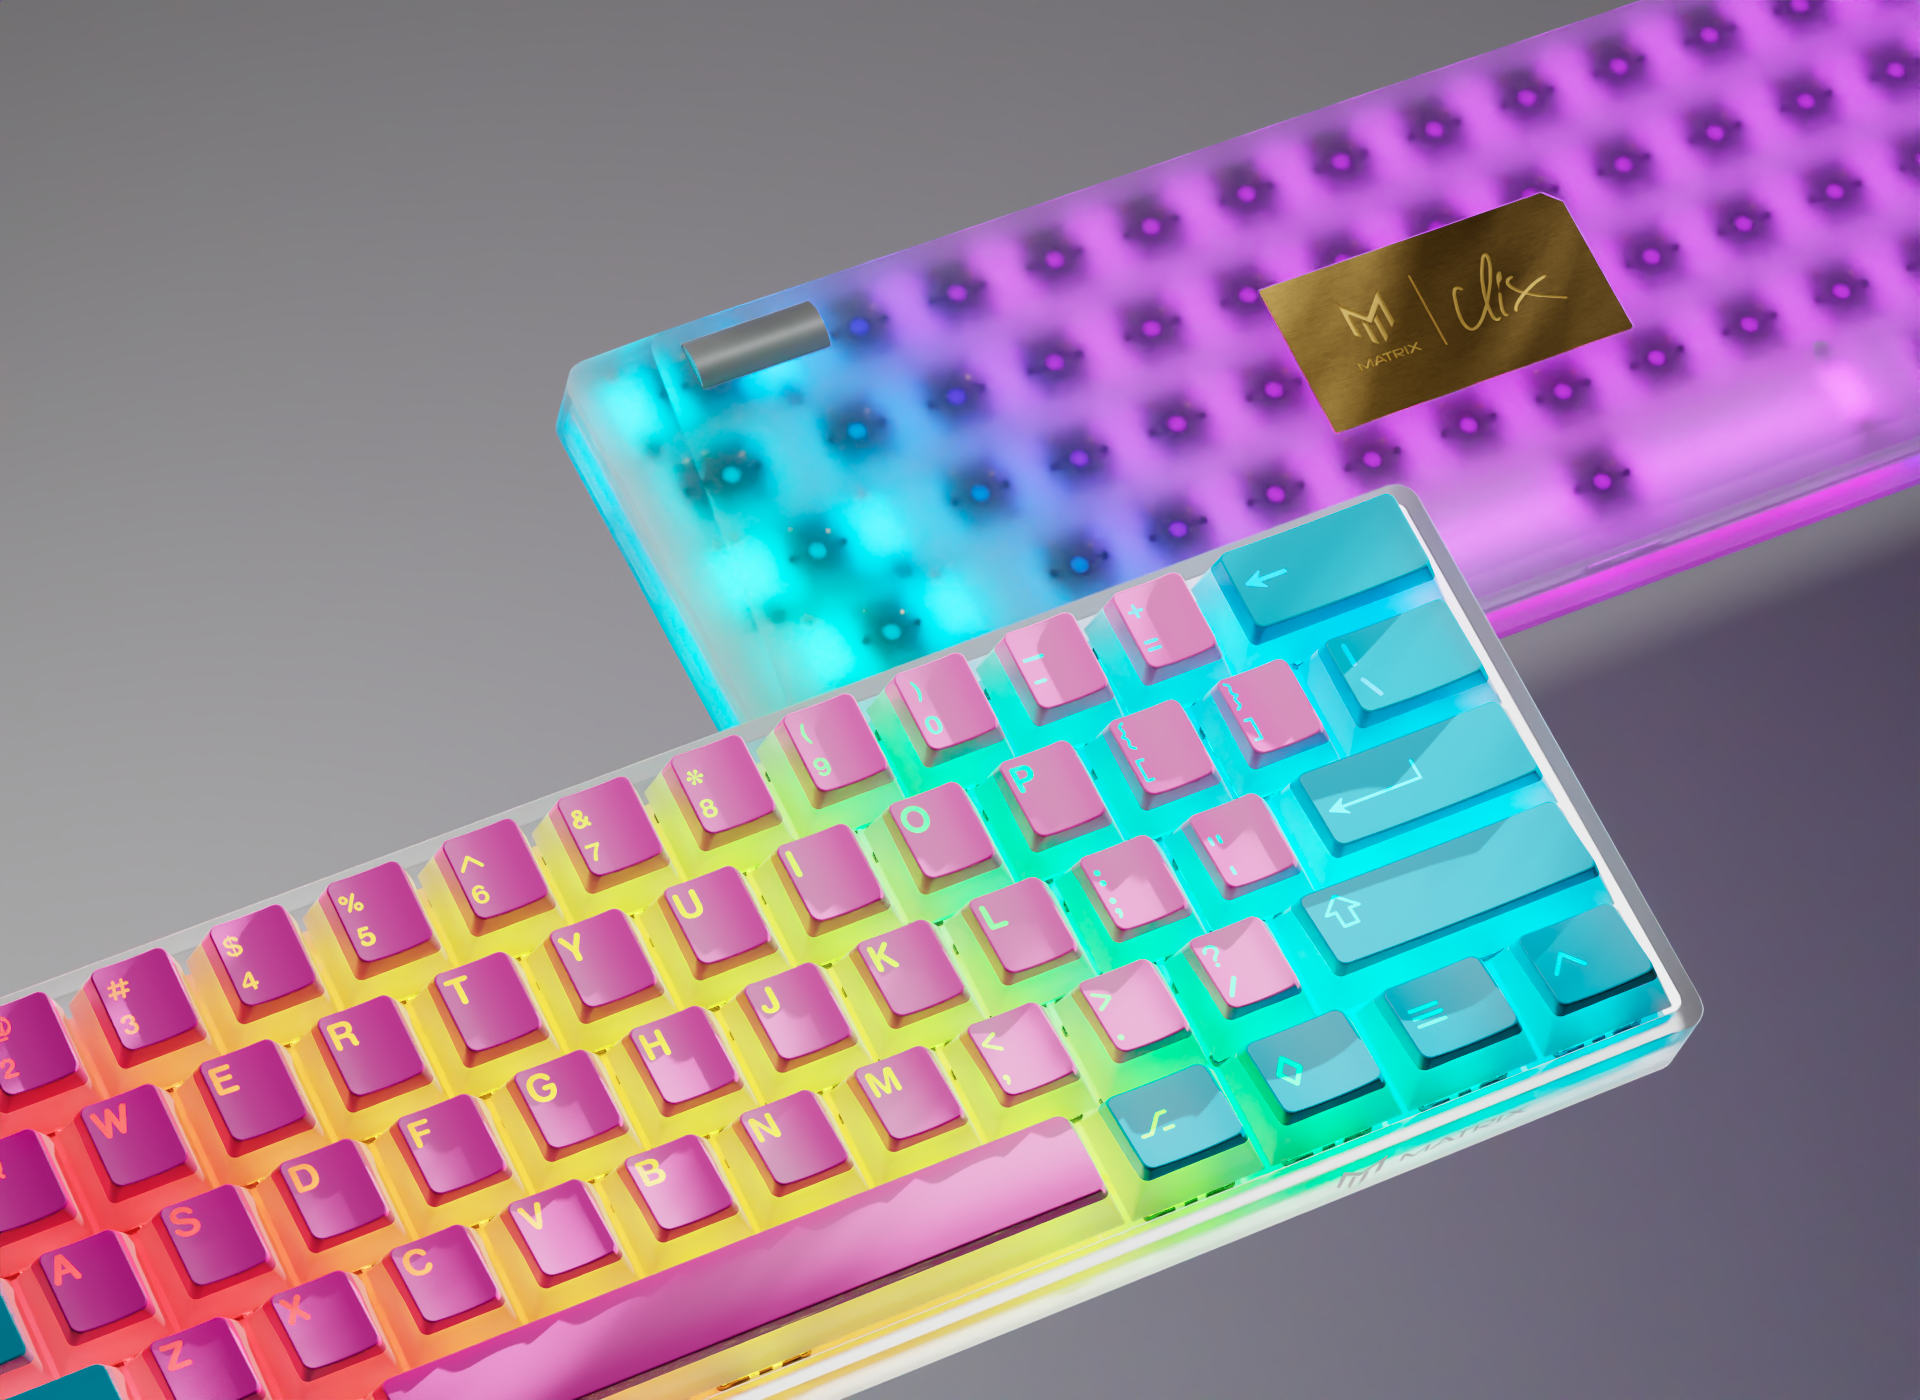 Matrix Keyboards: Shop High-Quality Mechanical Keyboards & Accessories